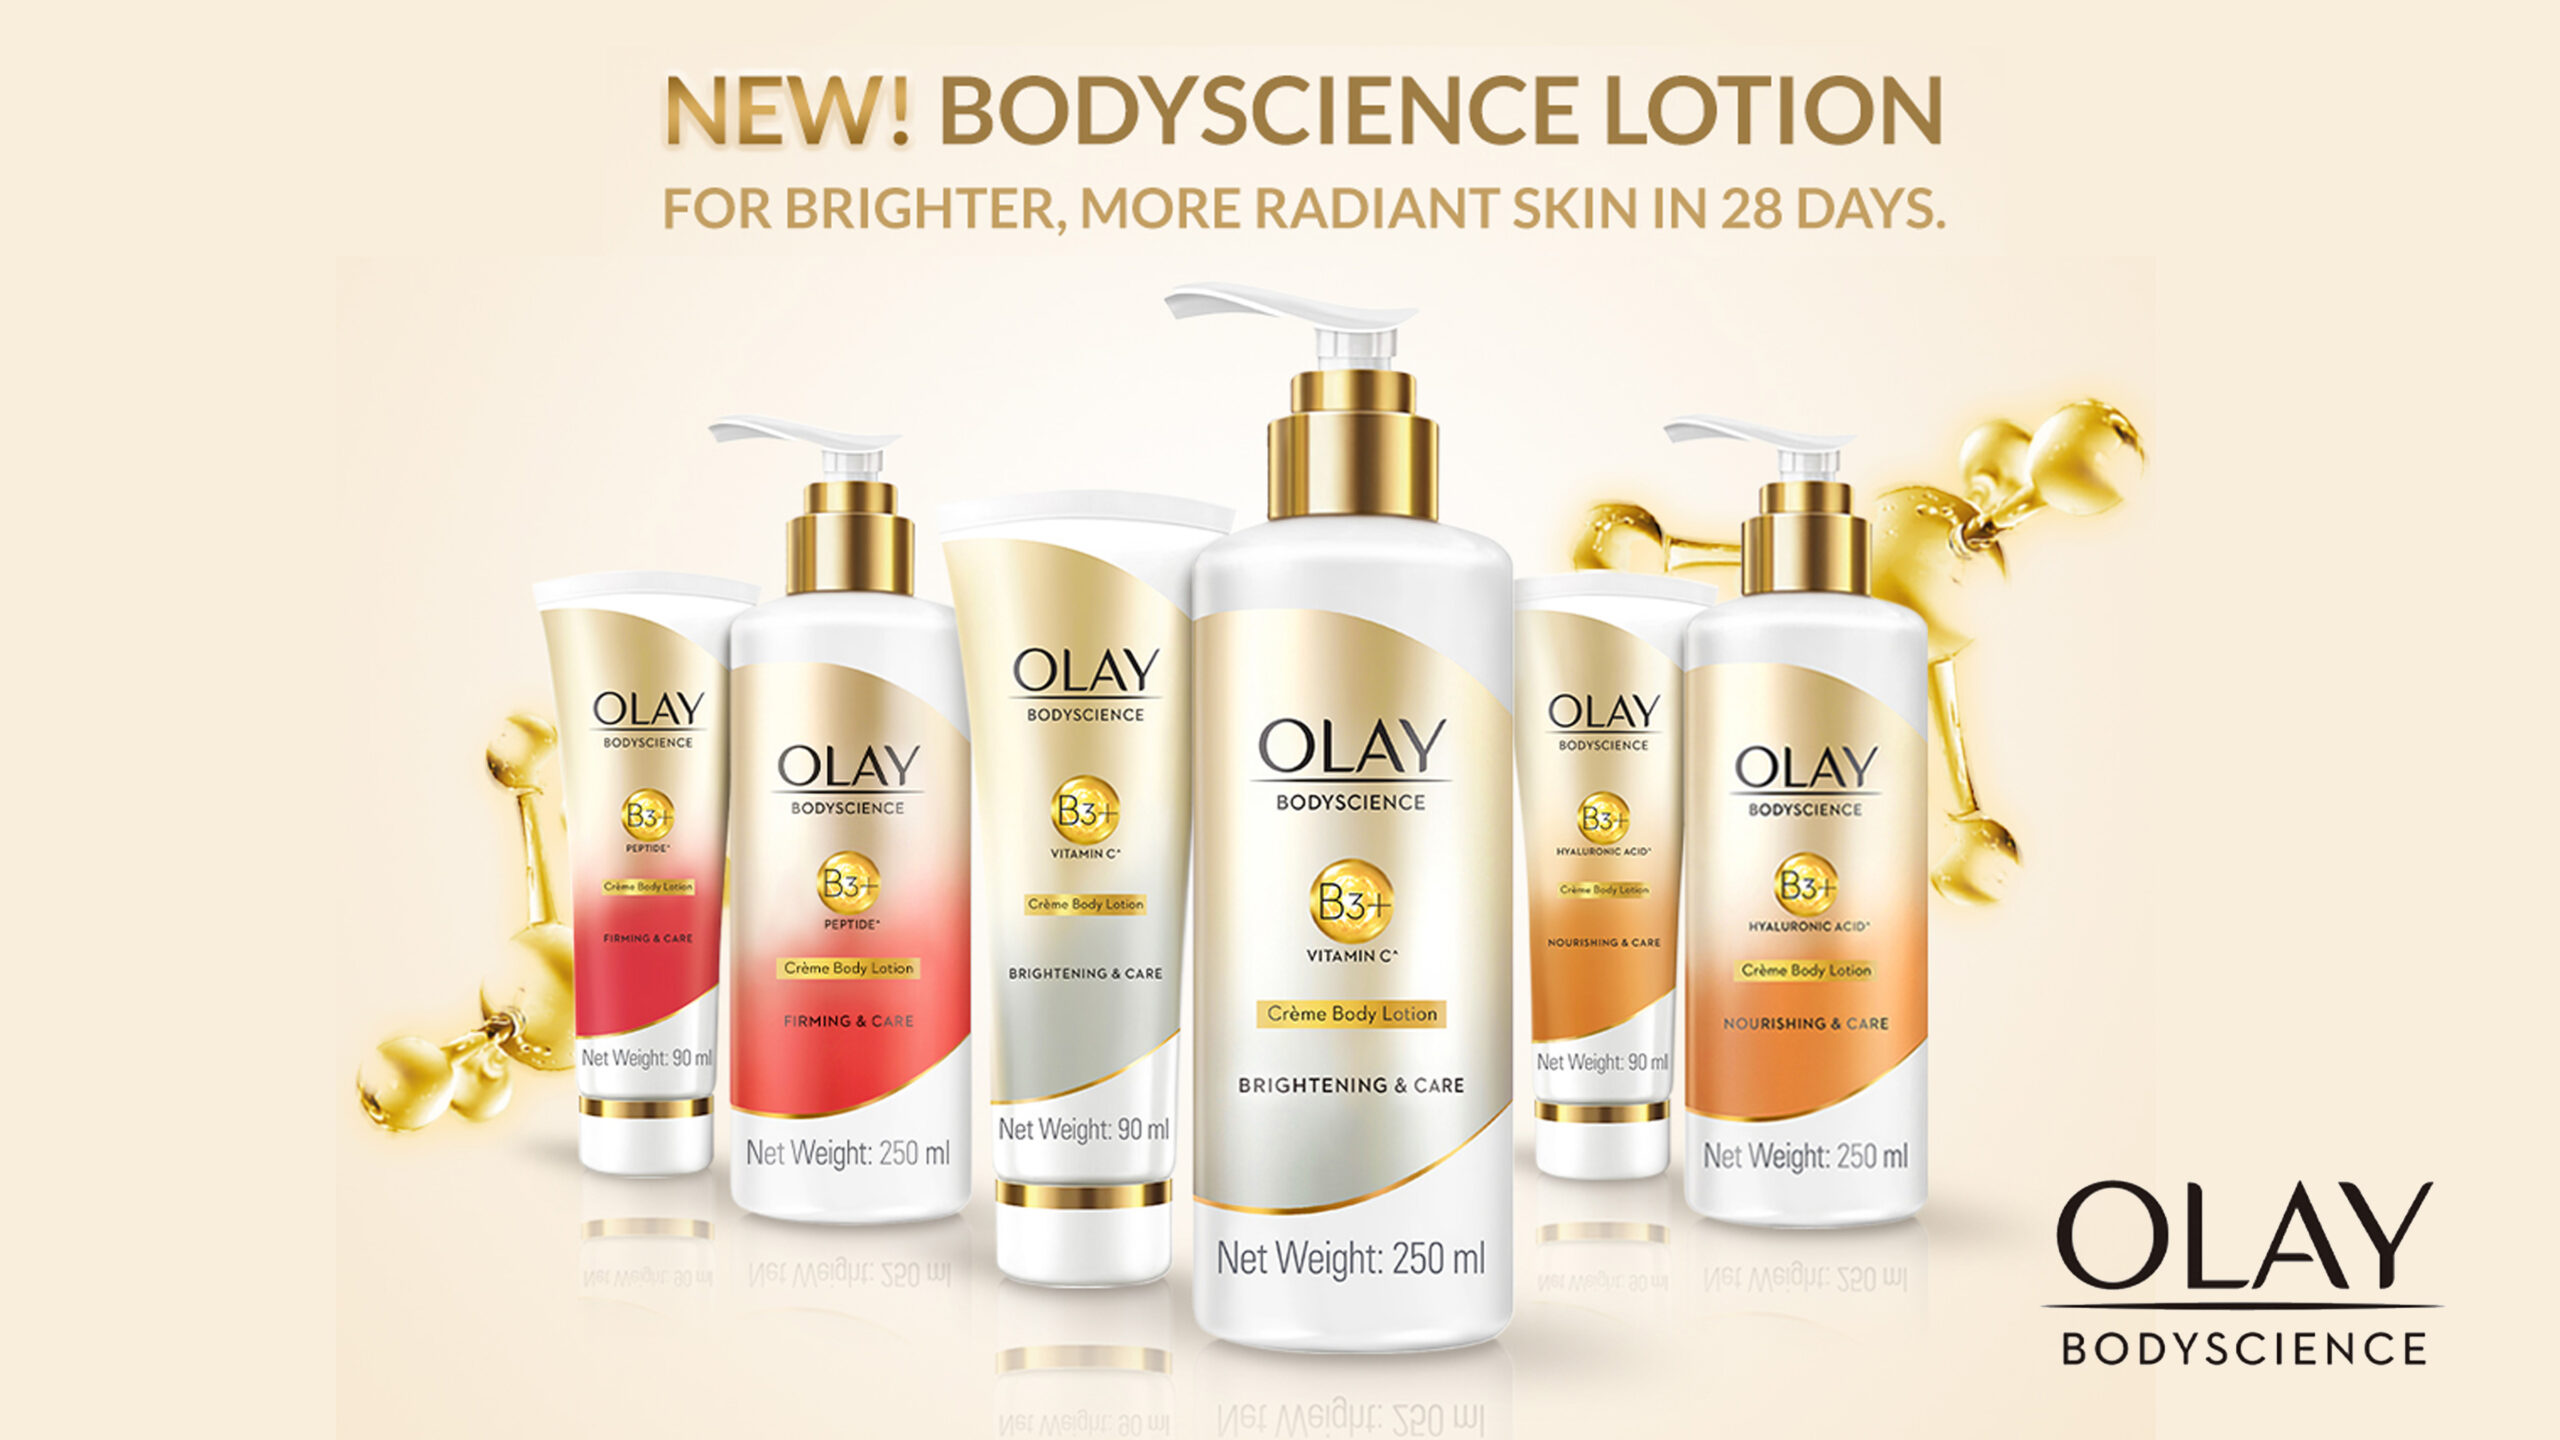 End the Year Bright with New Olay BodyScience Lotion